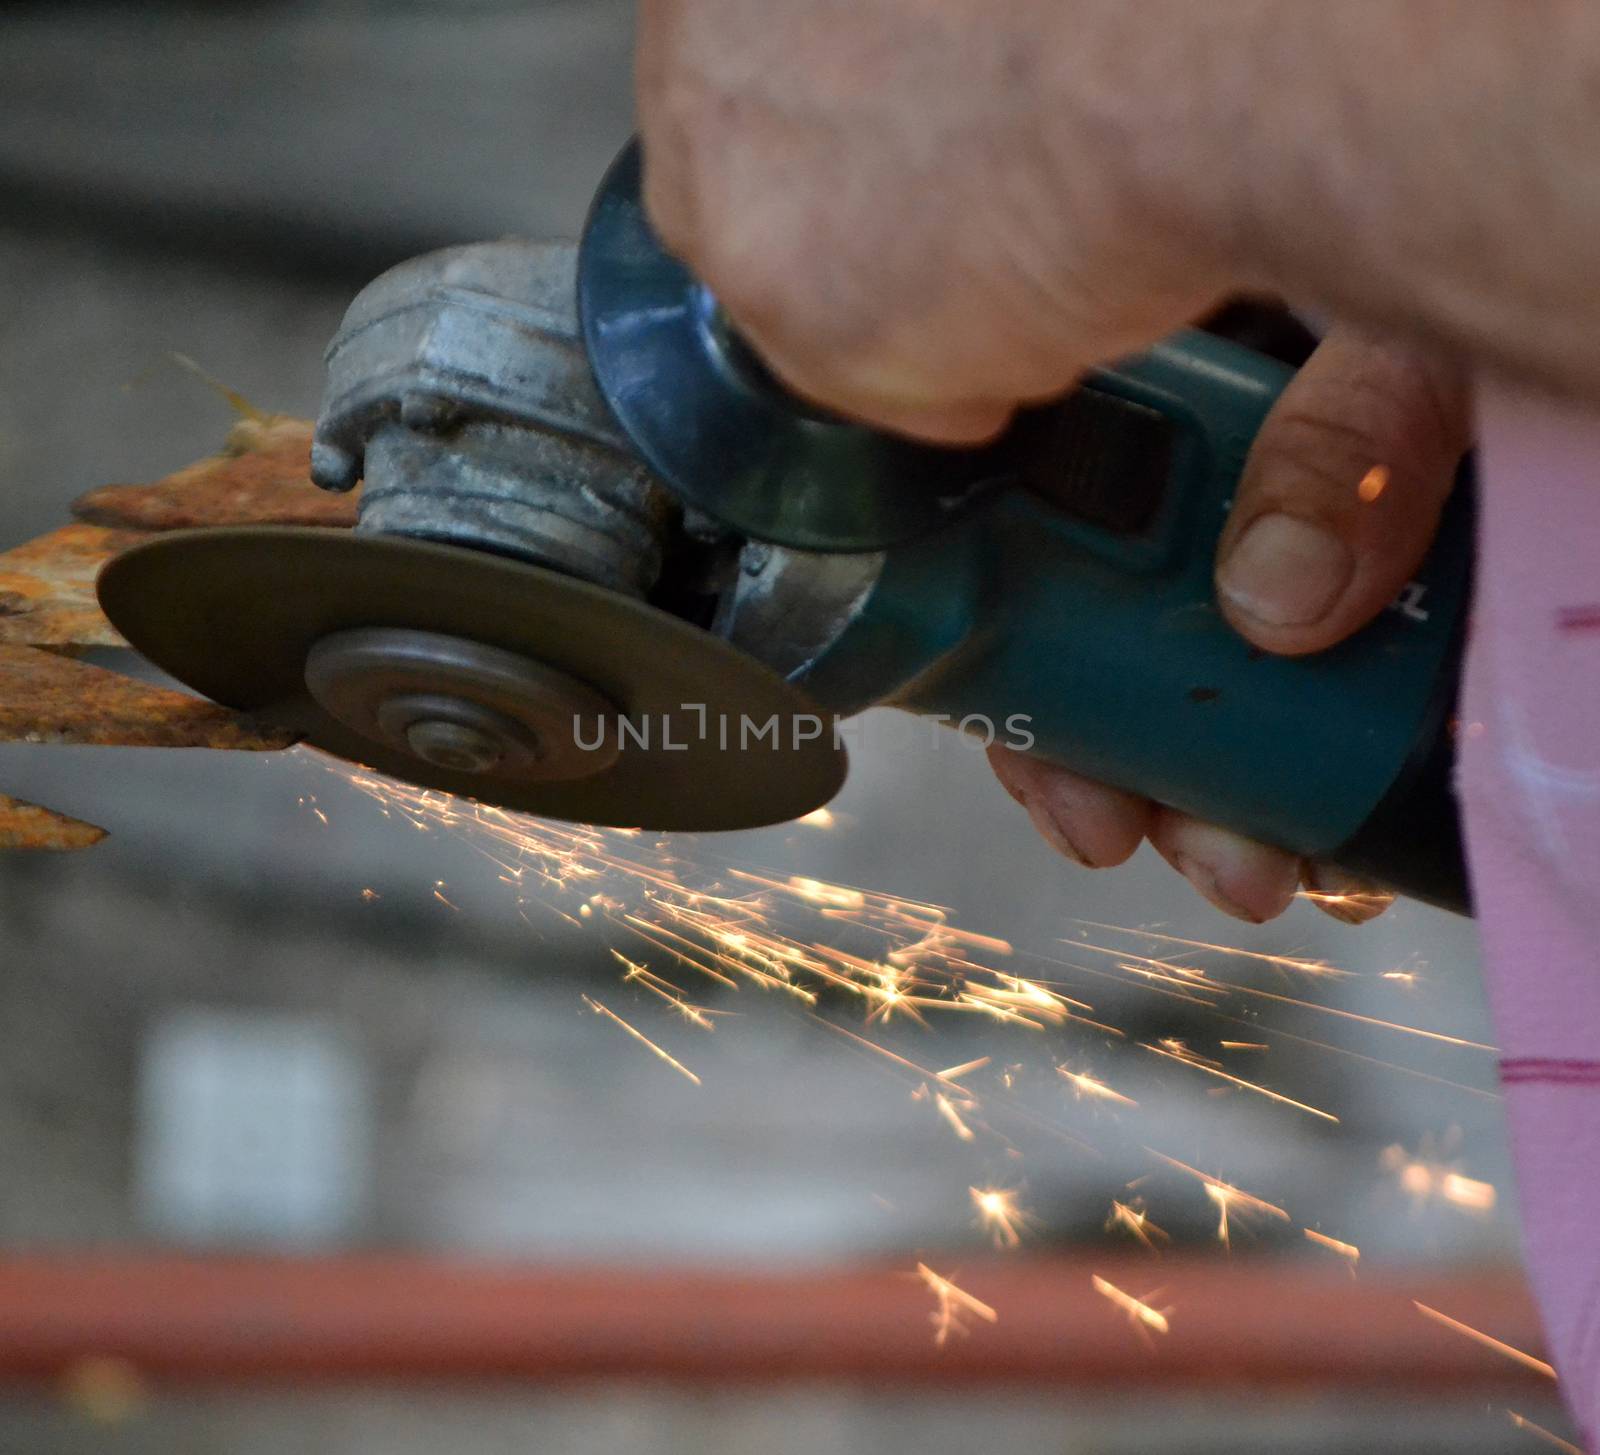 Man working with electric grinder tool on steel pipe and sparks by hibrida13